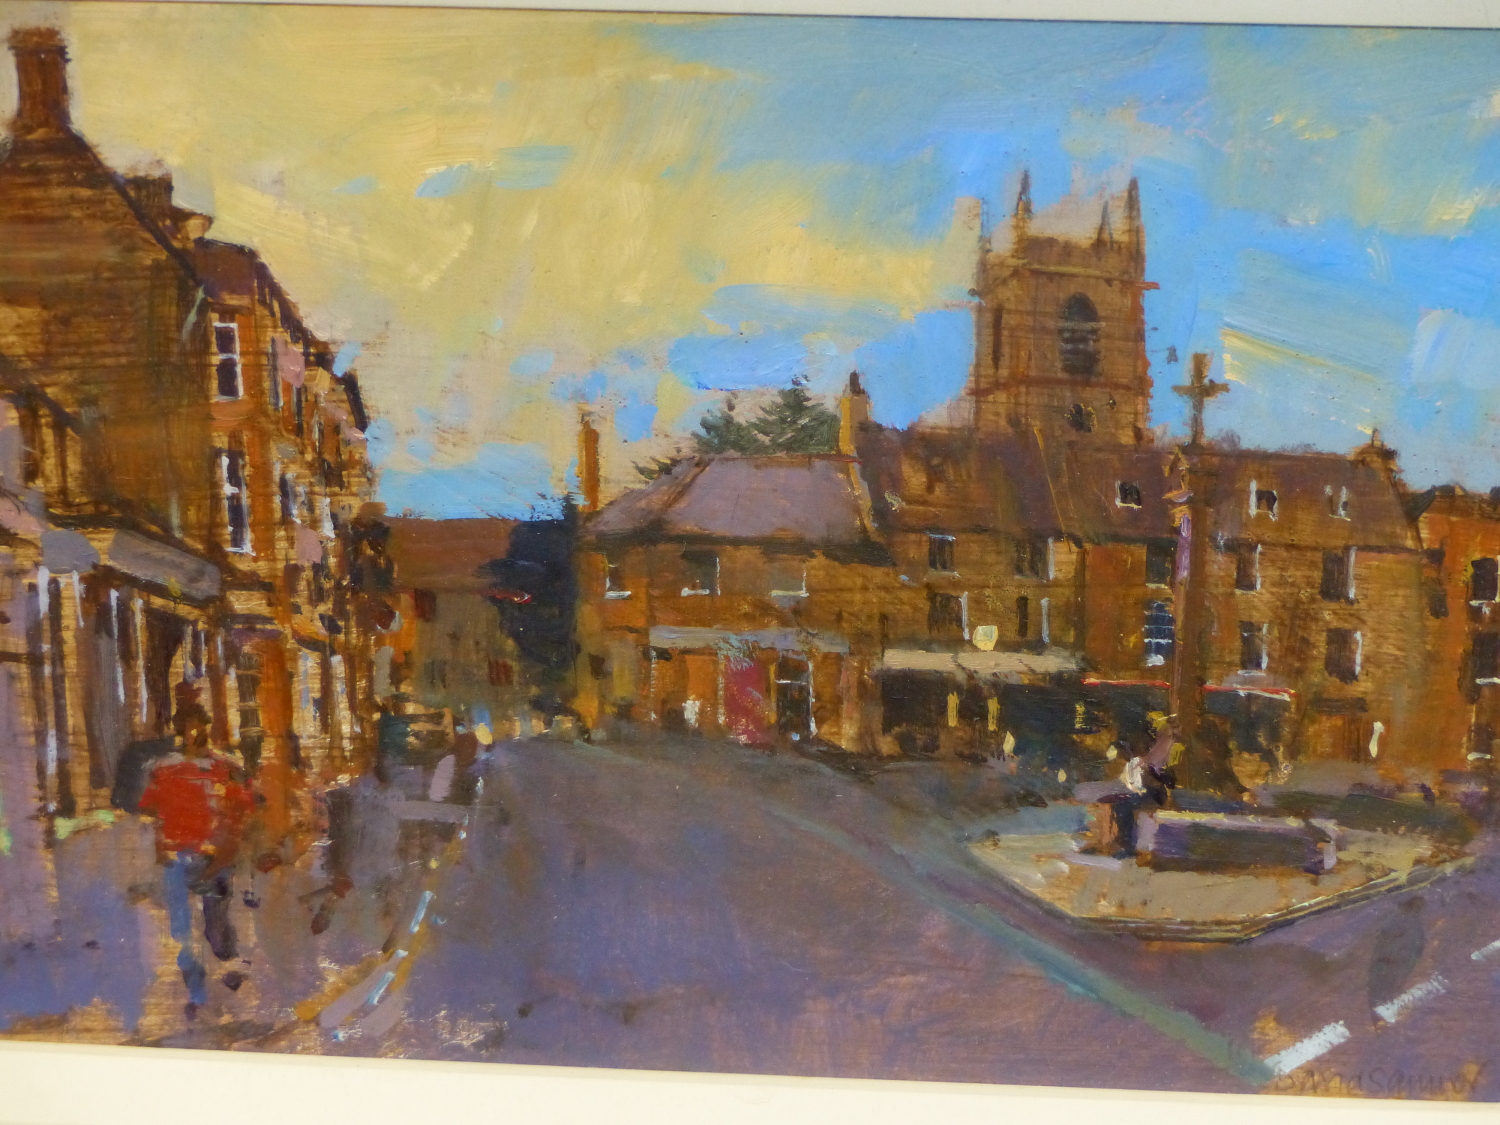 DAVID SAWYER. )1961-****) ARR. MARKET PLACE, STOW, SIGNED OIL ON BOARD. 21 x 31cms.